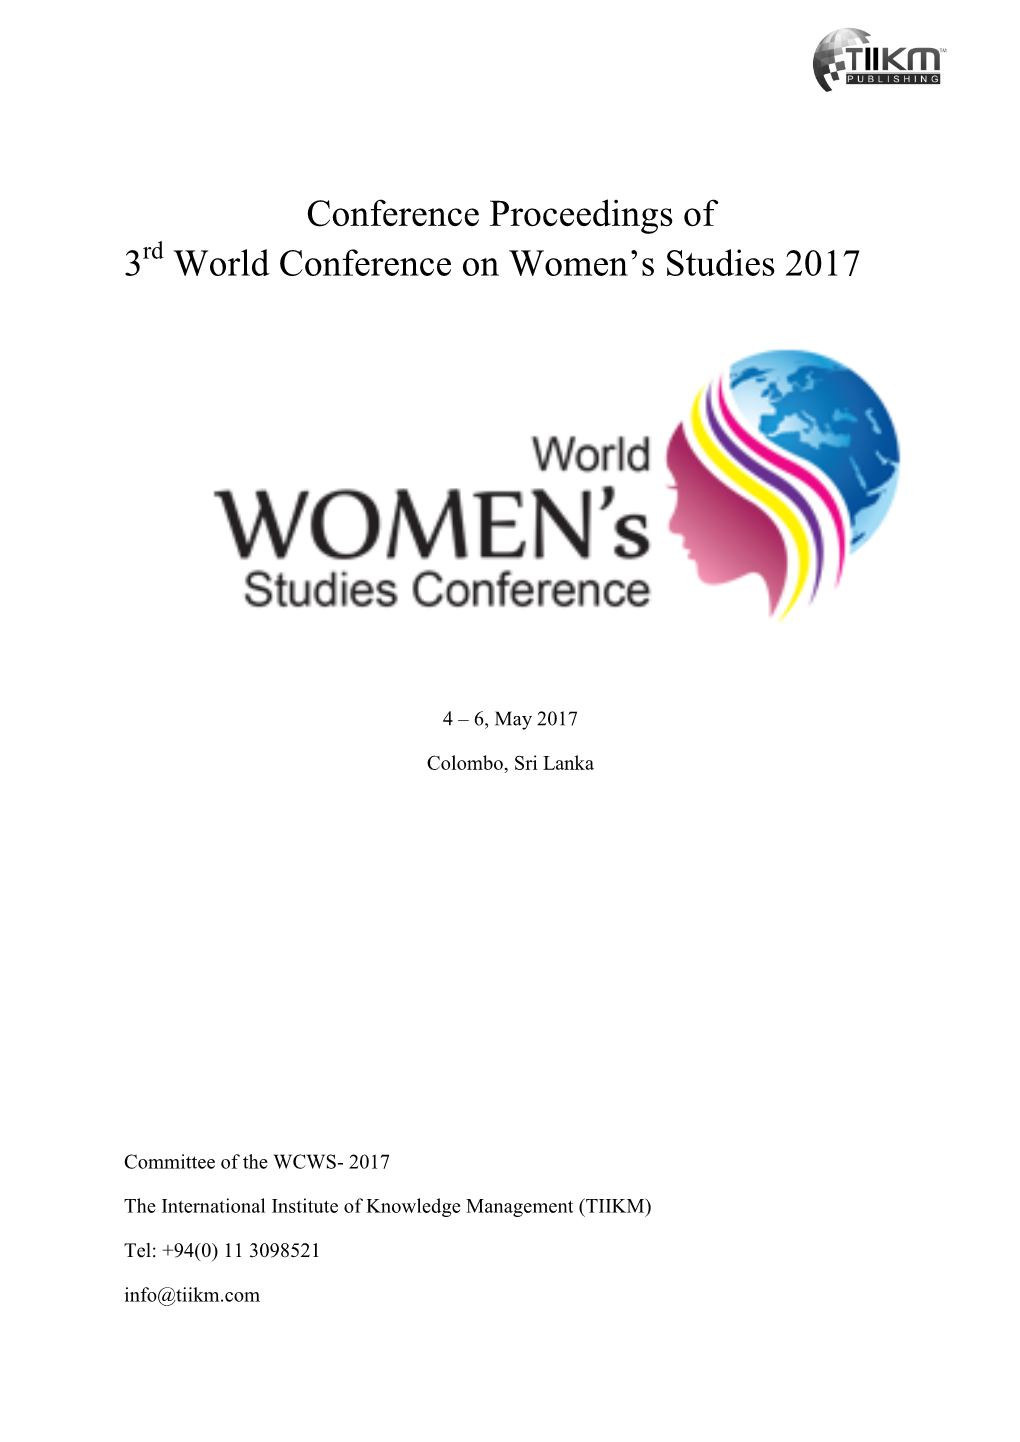 Conference Proceedings of Rd 3 World Conference on Women’S Studies 2017